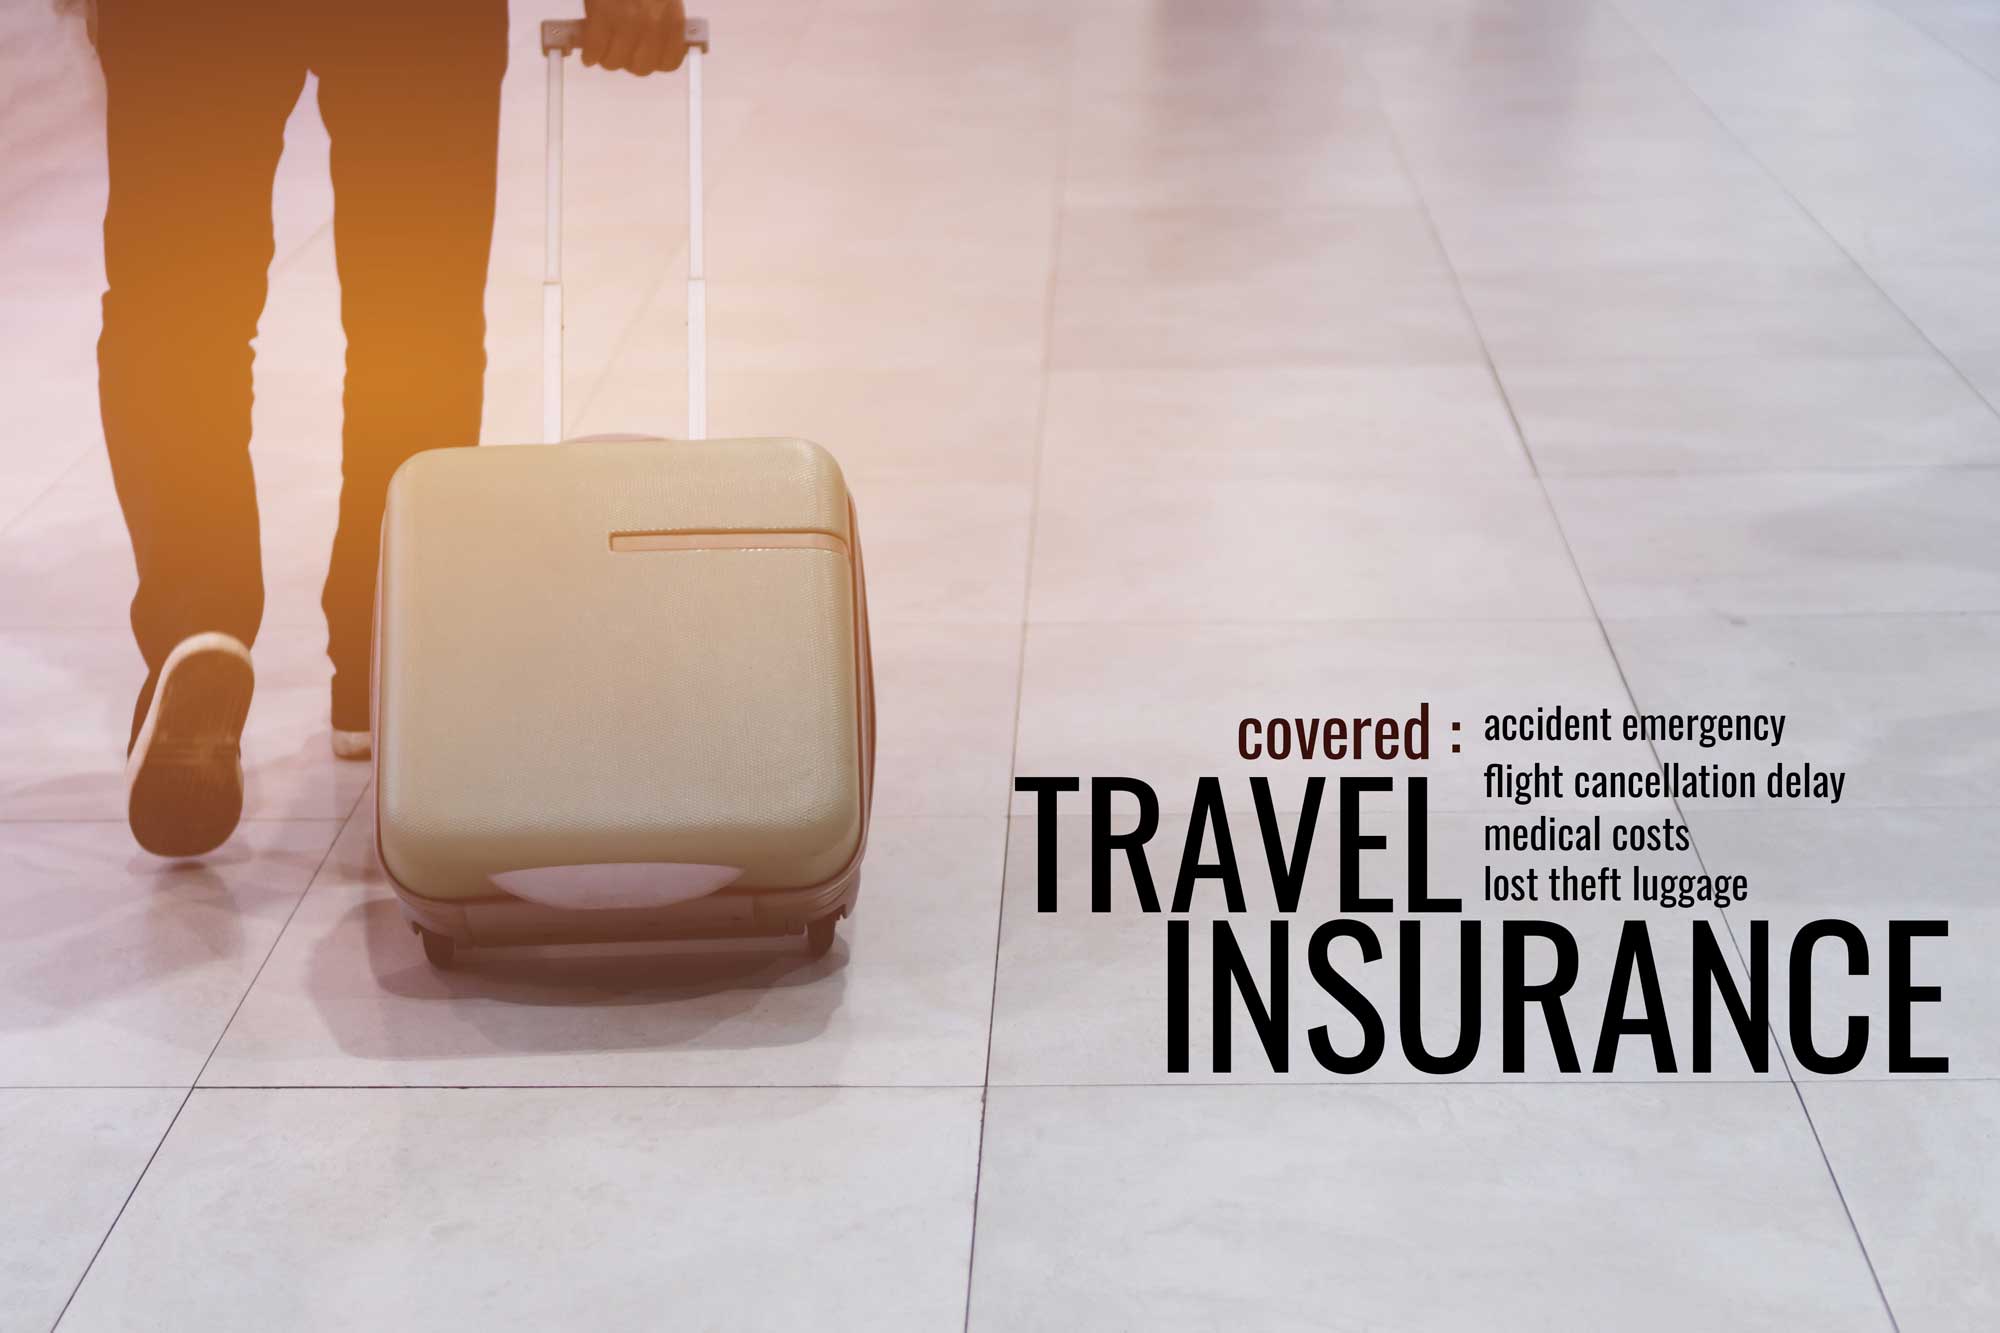 What does business accident and travel insurance cover?